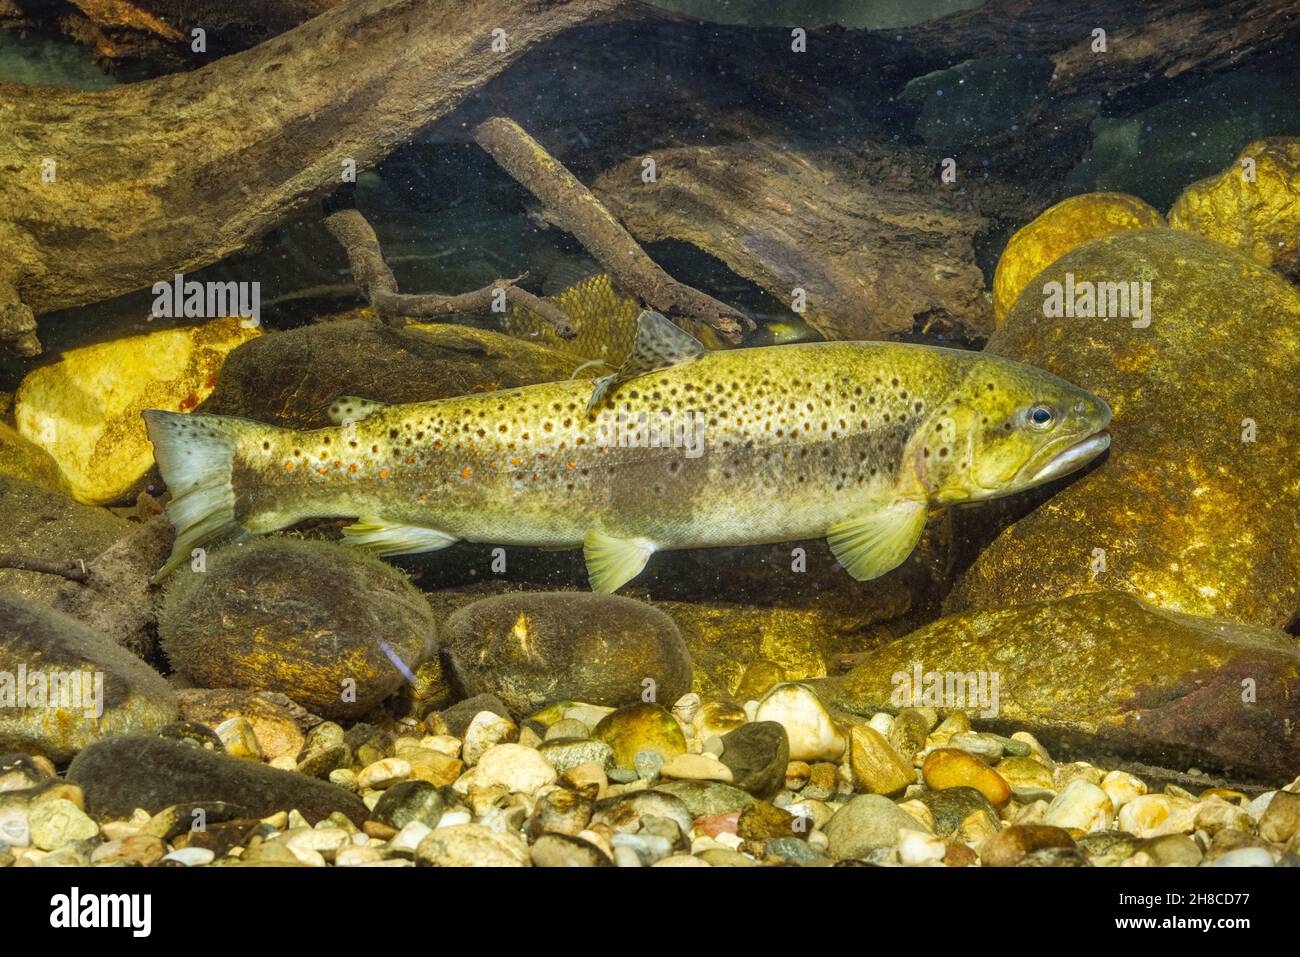 brown trout, river trout, brook trout (Salmo trutta fario), protective colouration in front of deadwood, Germany Stock Photo